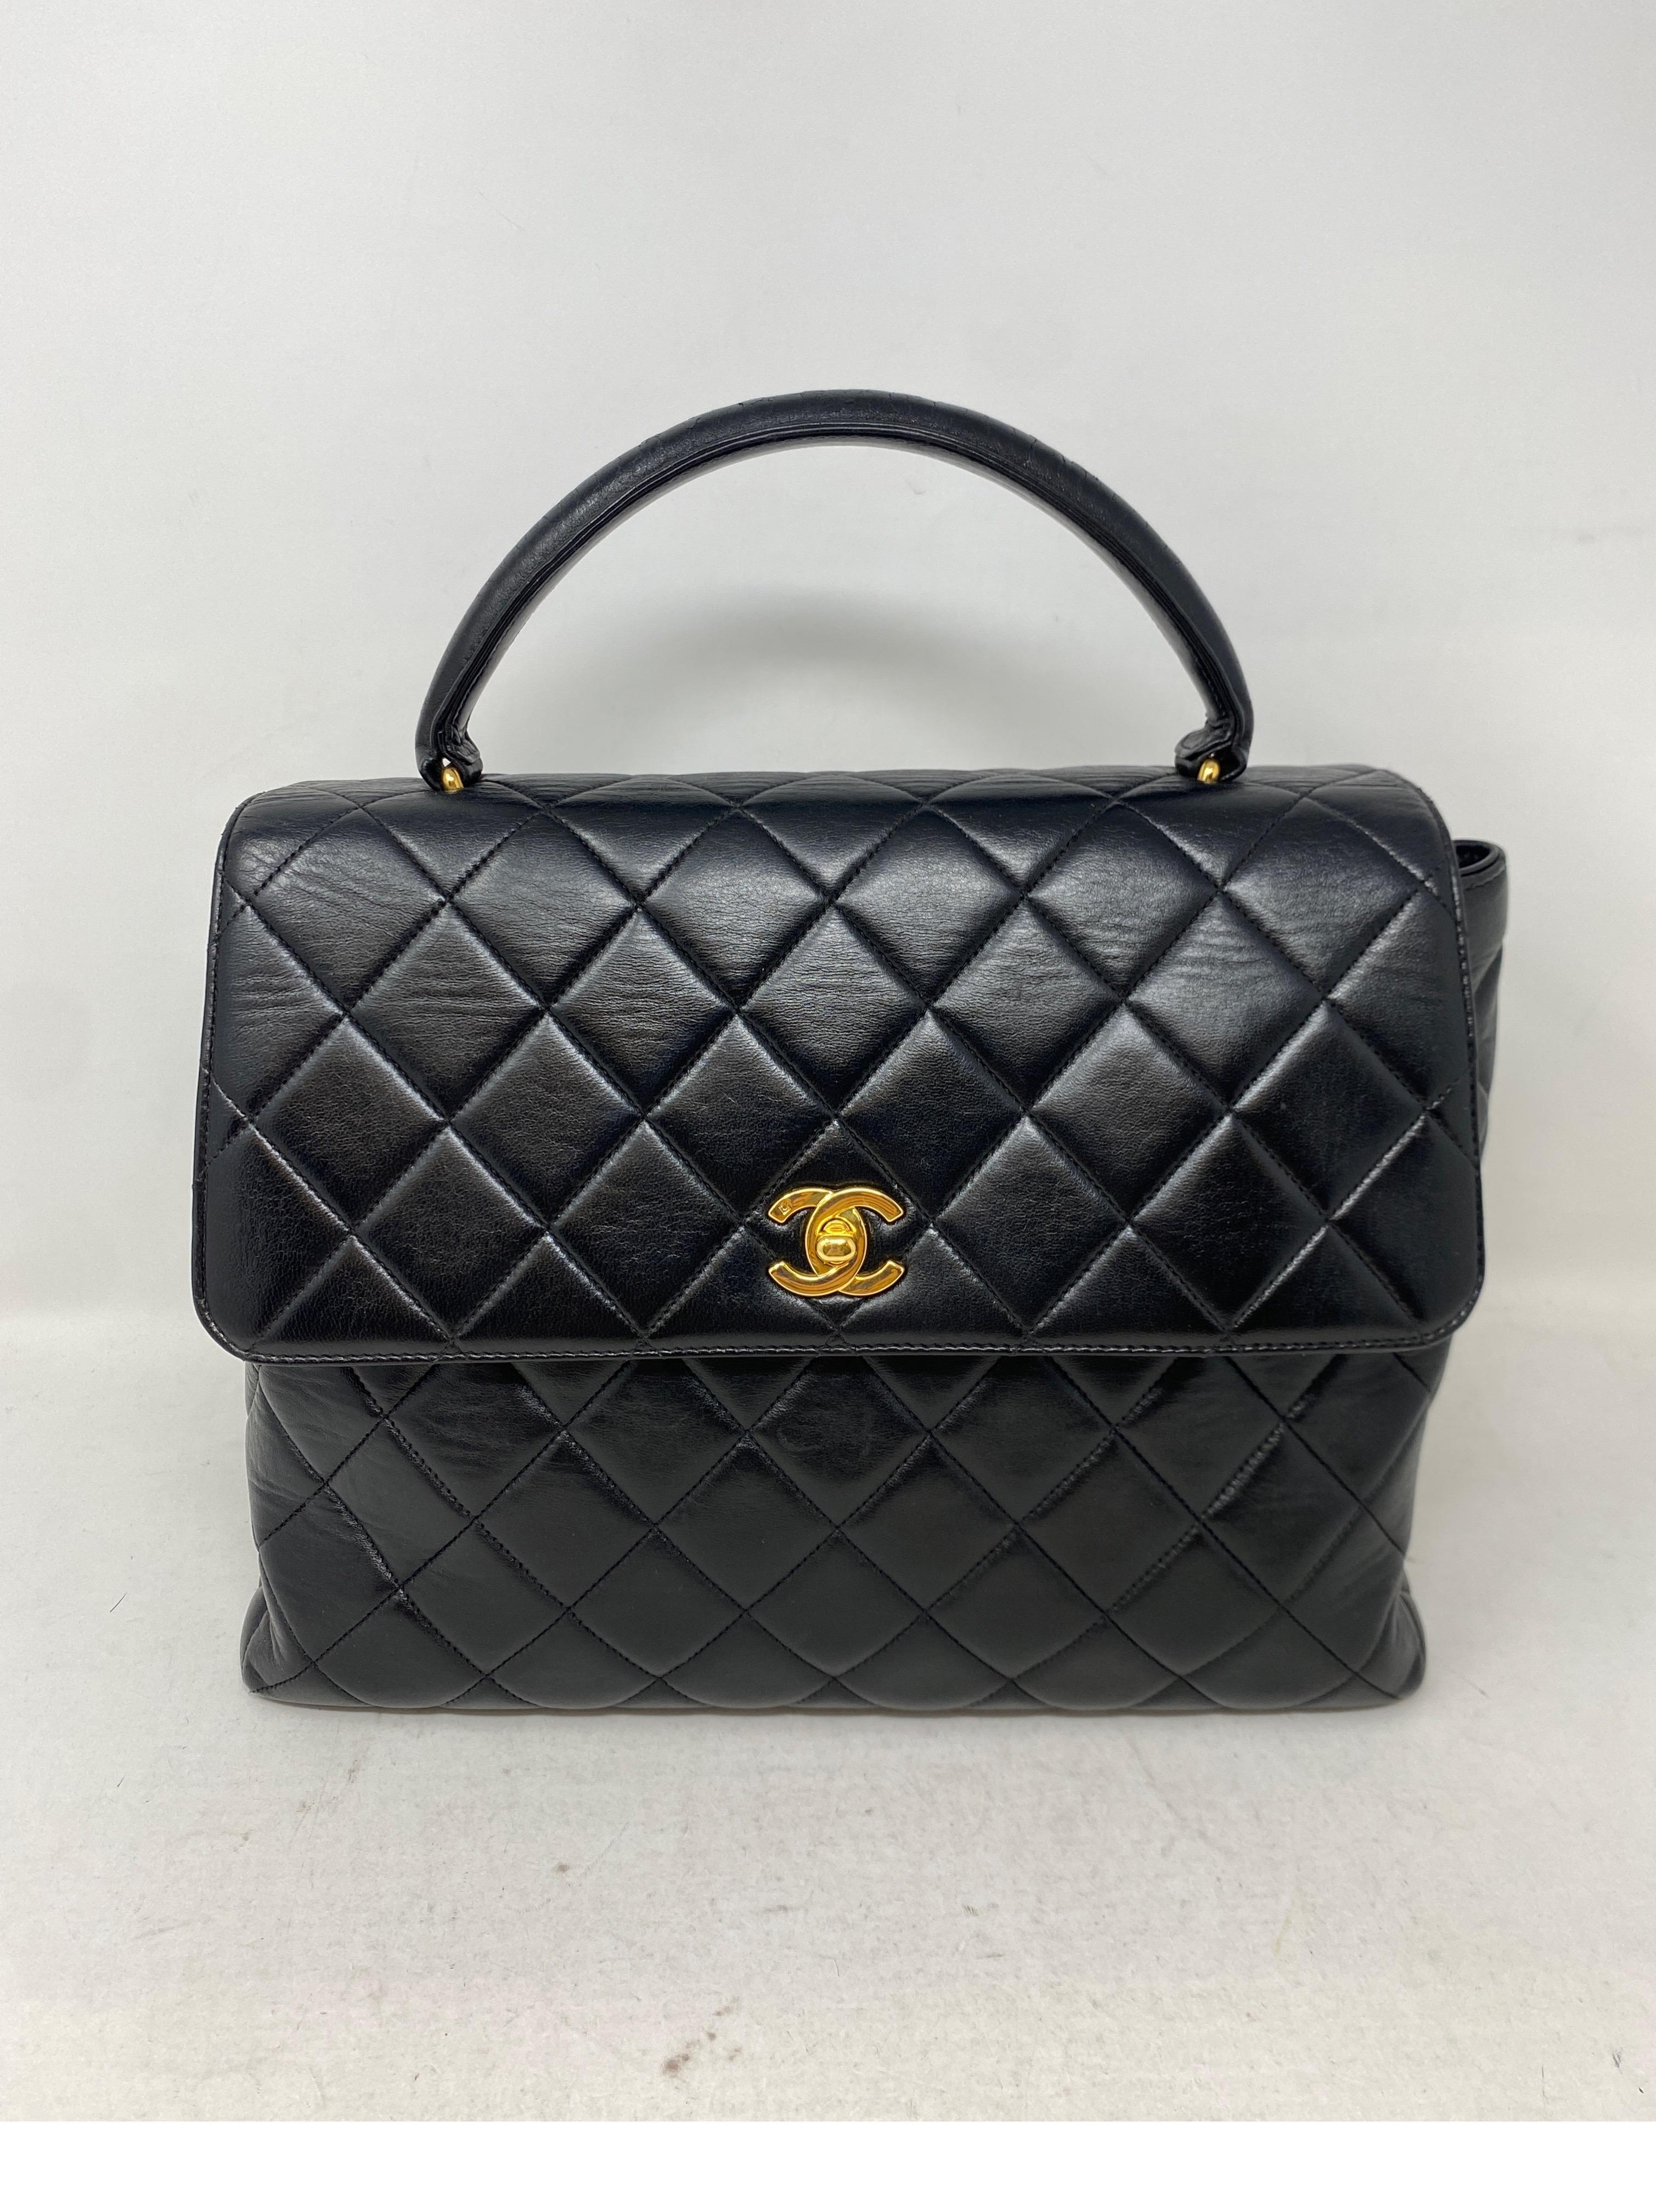 Chanel Black Vintage Kelly Bag. Rare collector's bag. Black lambskin leather. Gold hardware. Good condition. Clean interior. Guaranteed authentic. 